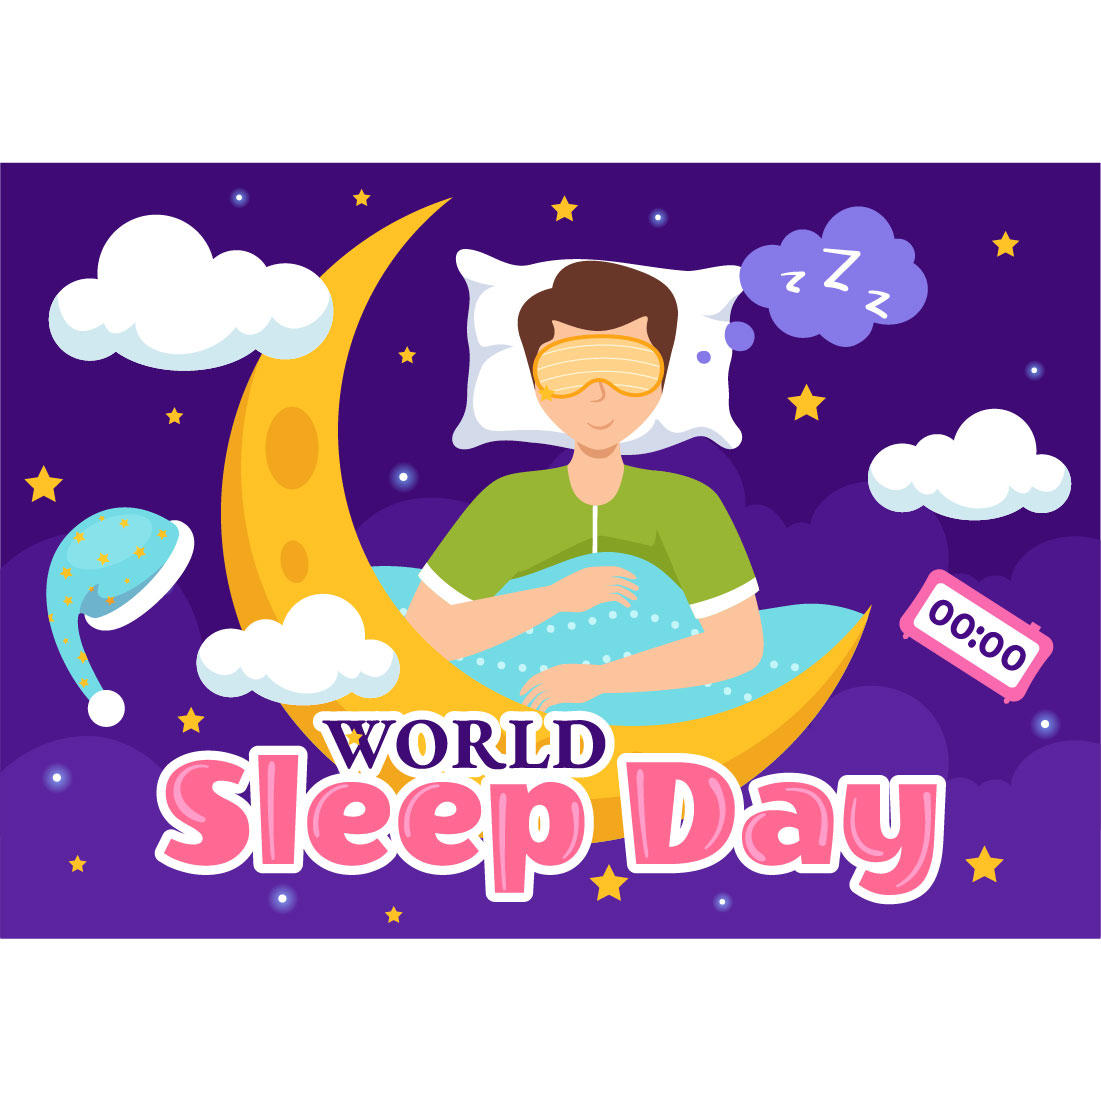 12 World Sleep Day Illustration preview image.